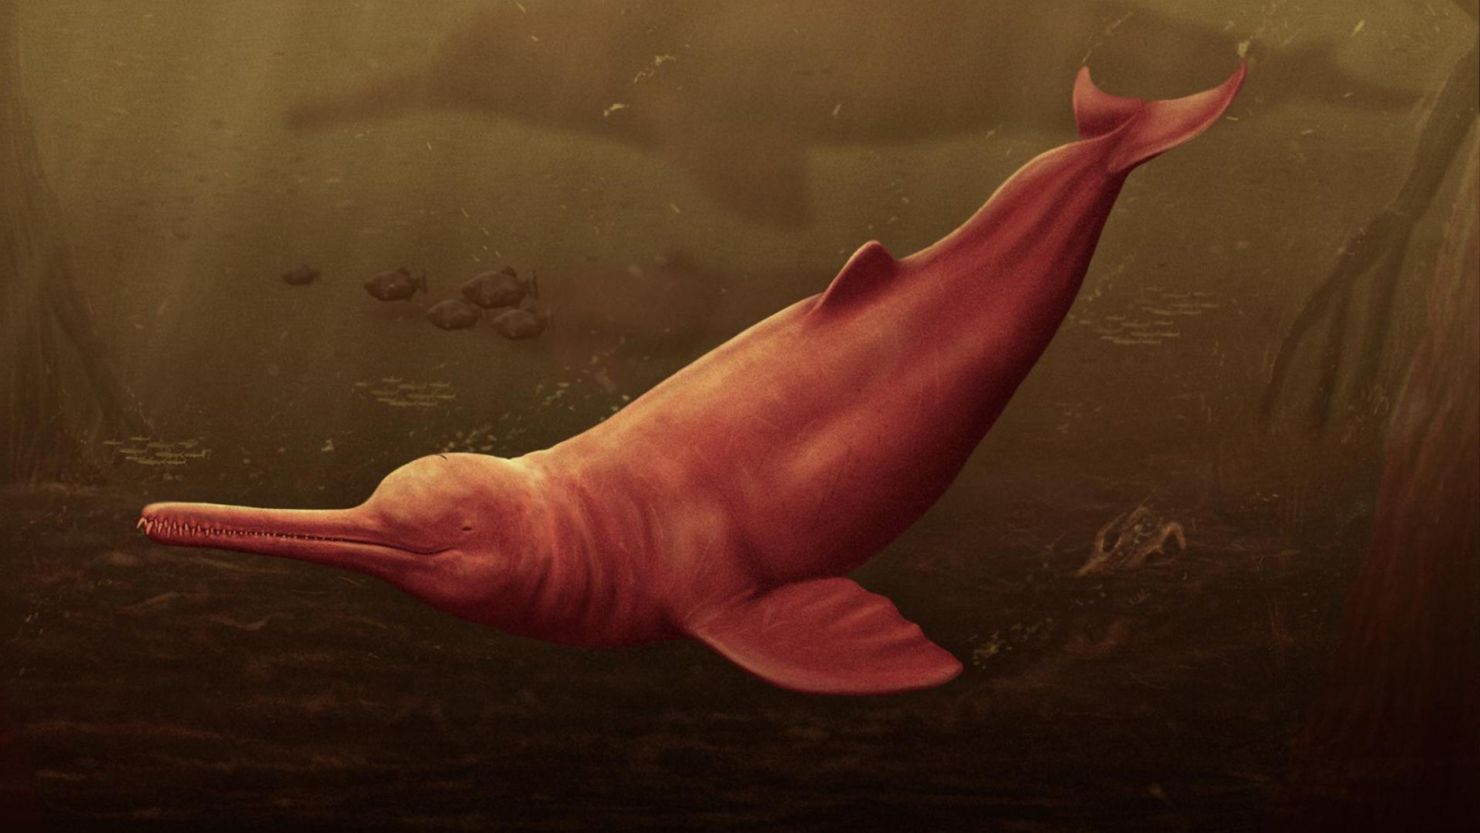 An artistic reconstruction depicts Pebanista yacuruna in the murky waters of the Peruvian proto-Amazonia.